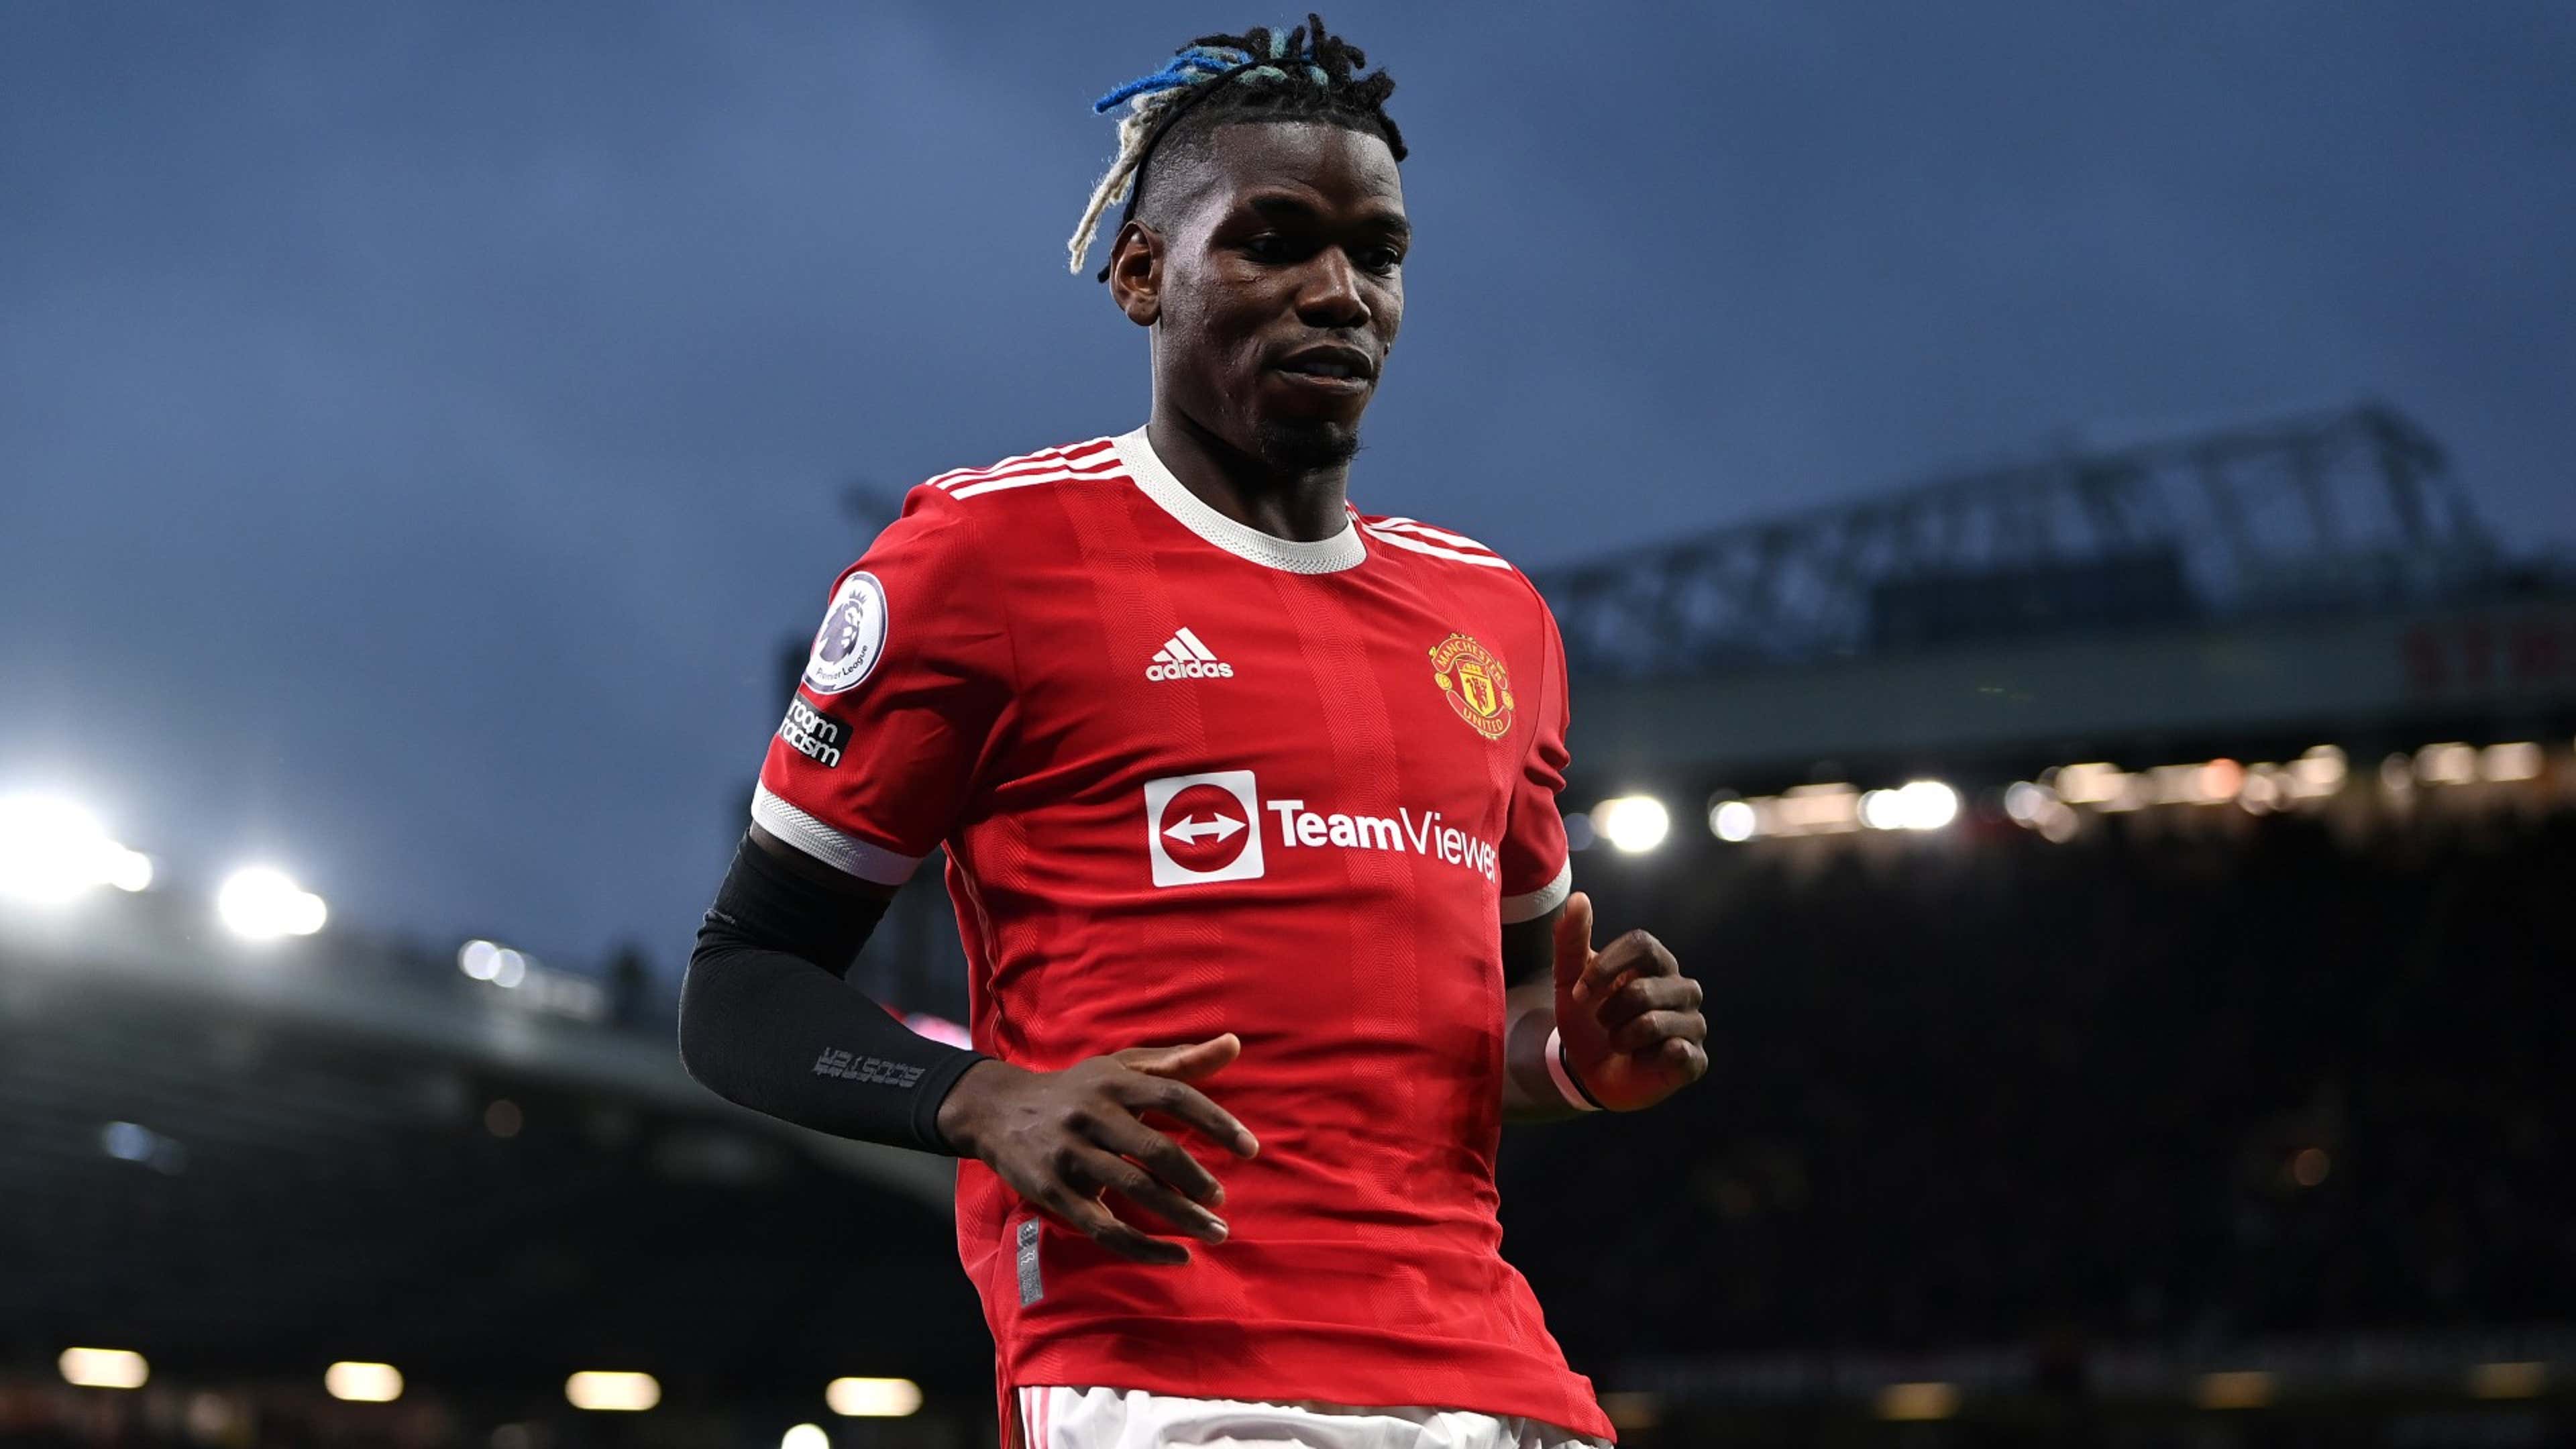 Manchester United footballer Paul Pogba stands out as he takes